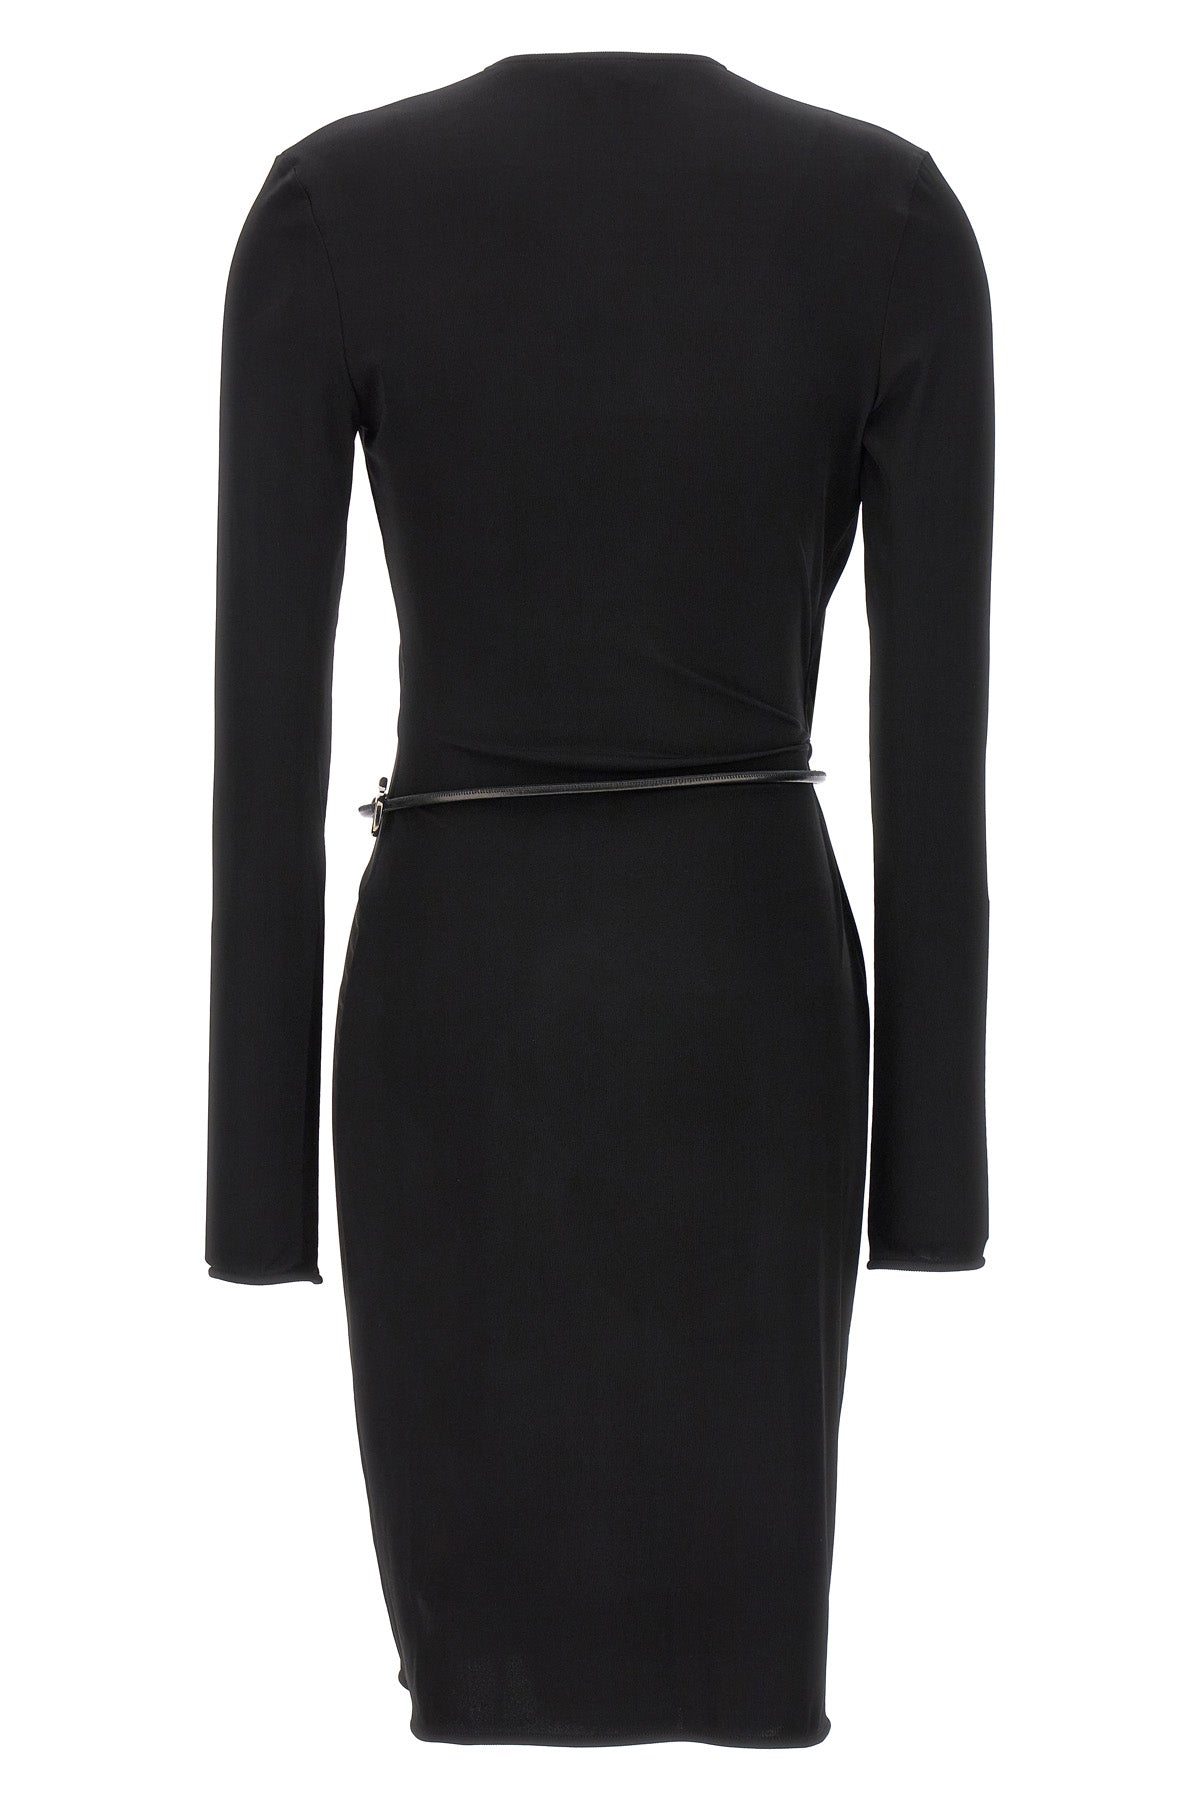 TOM FORD LEATHER JERSEY DRESS